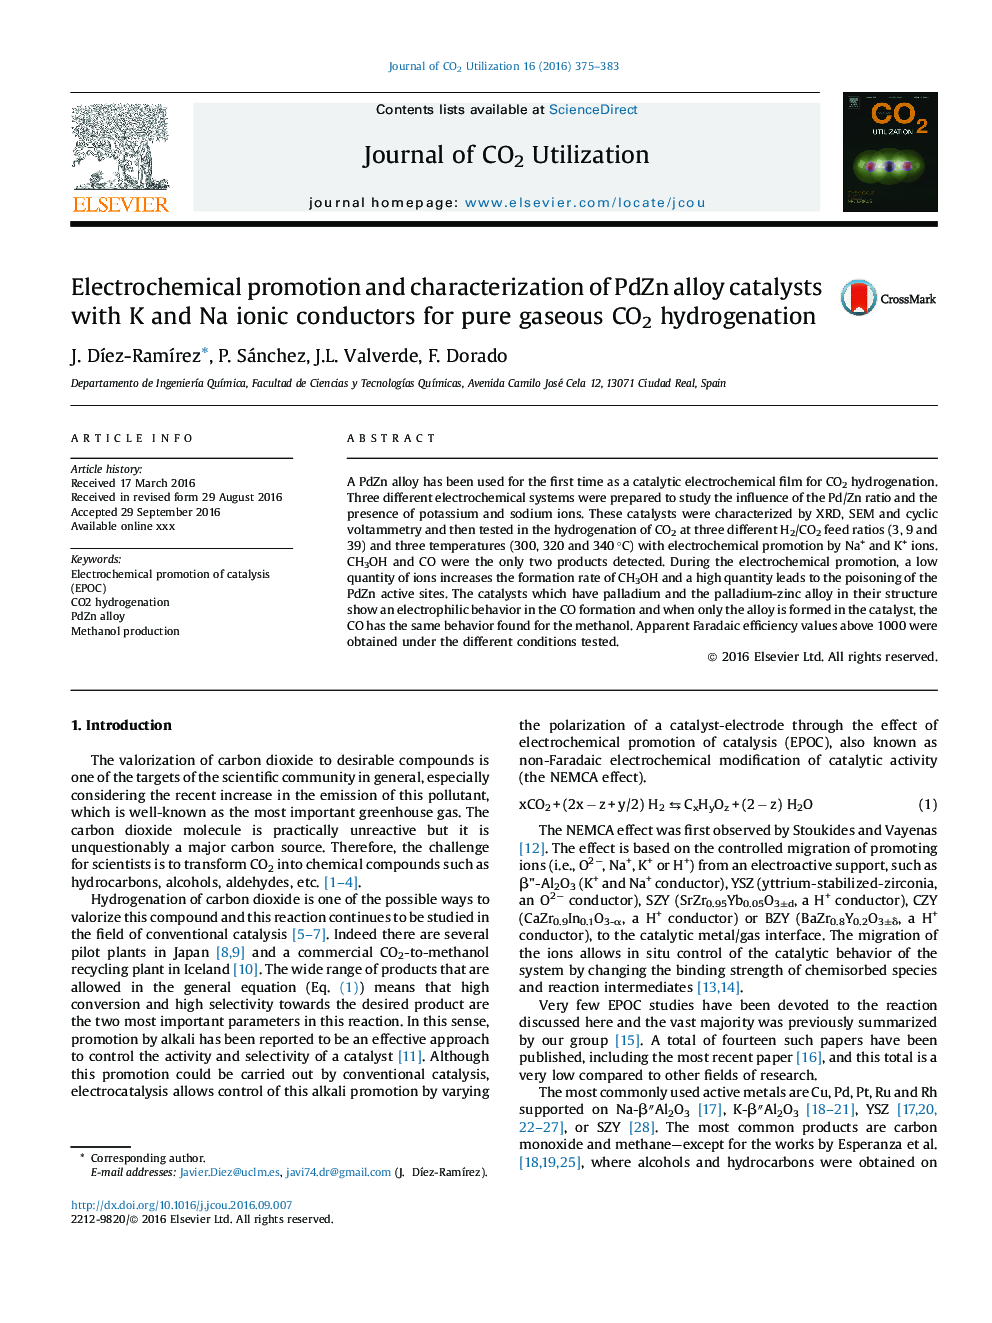 Electrochemical promotion and characterization of PdZn alloy catalysts with K and Na ionic conductors for pure gaseous CO2 hydrogenation